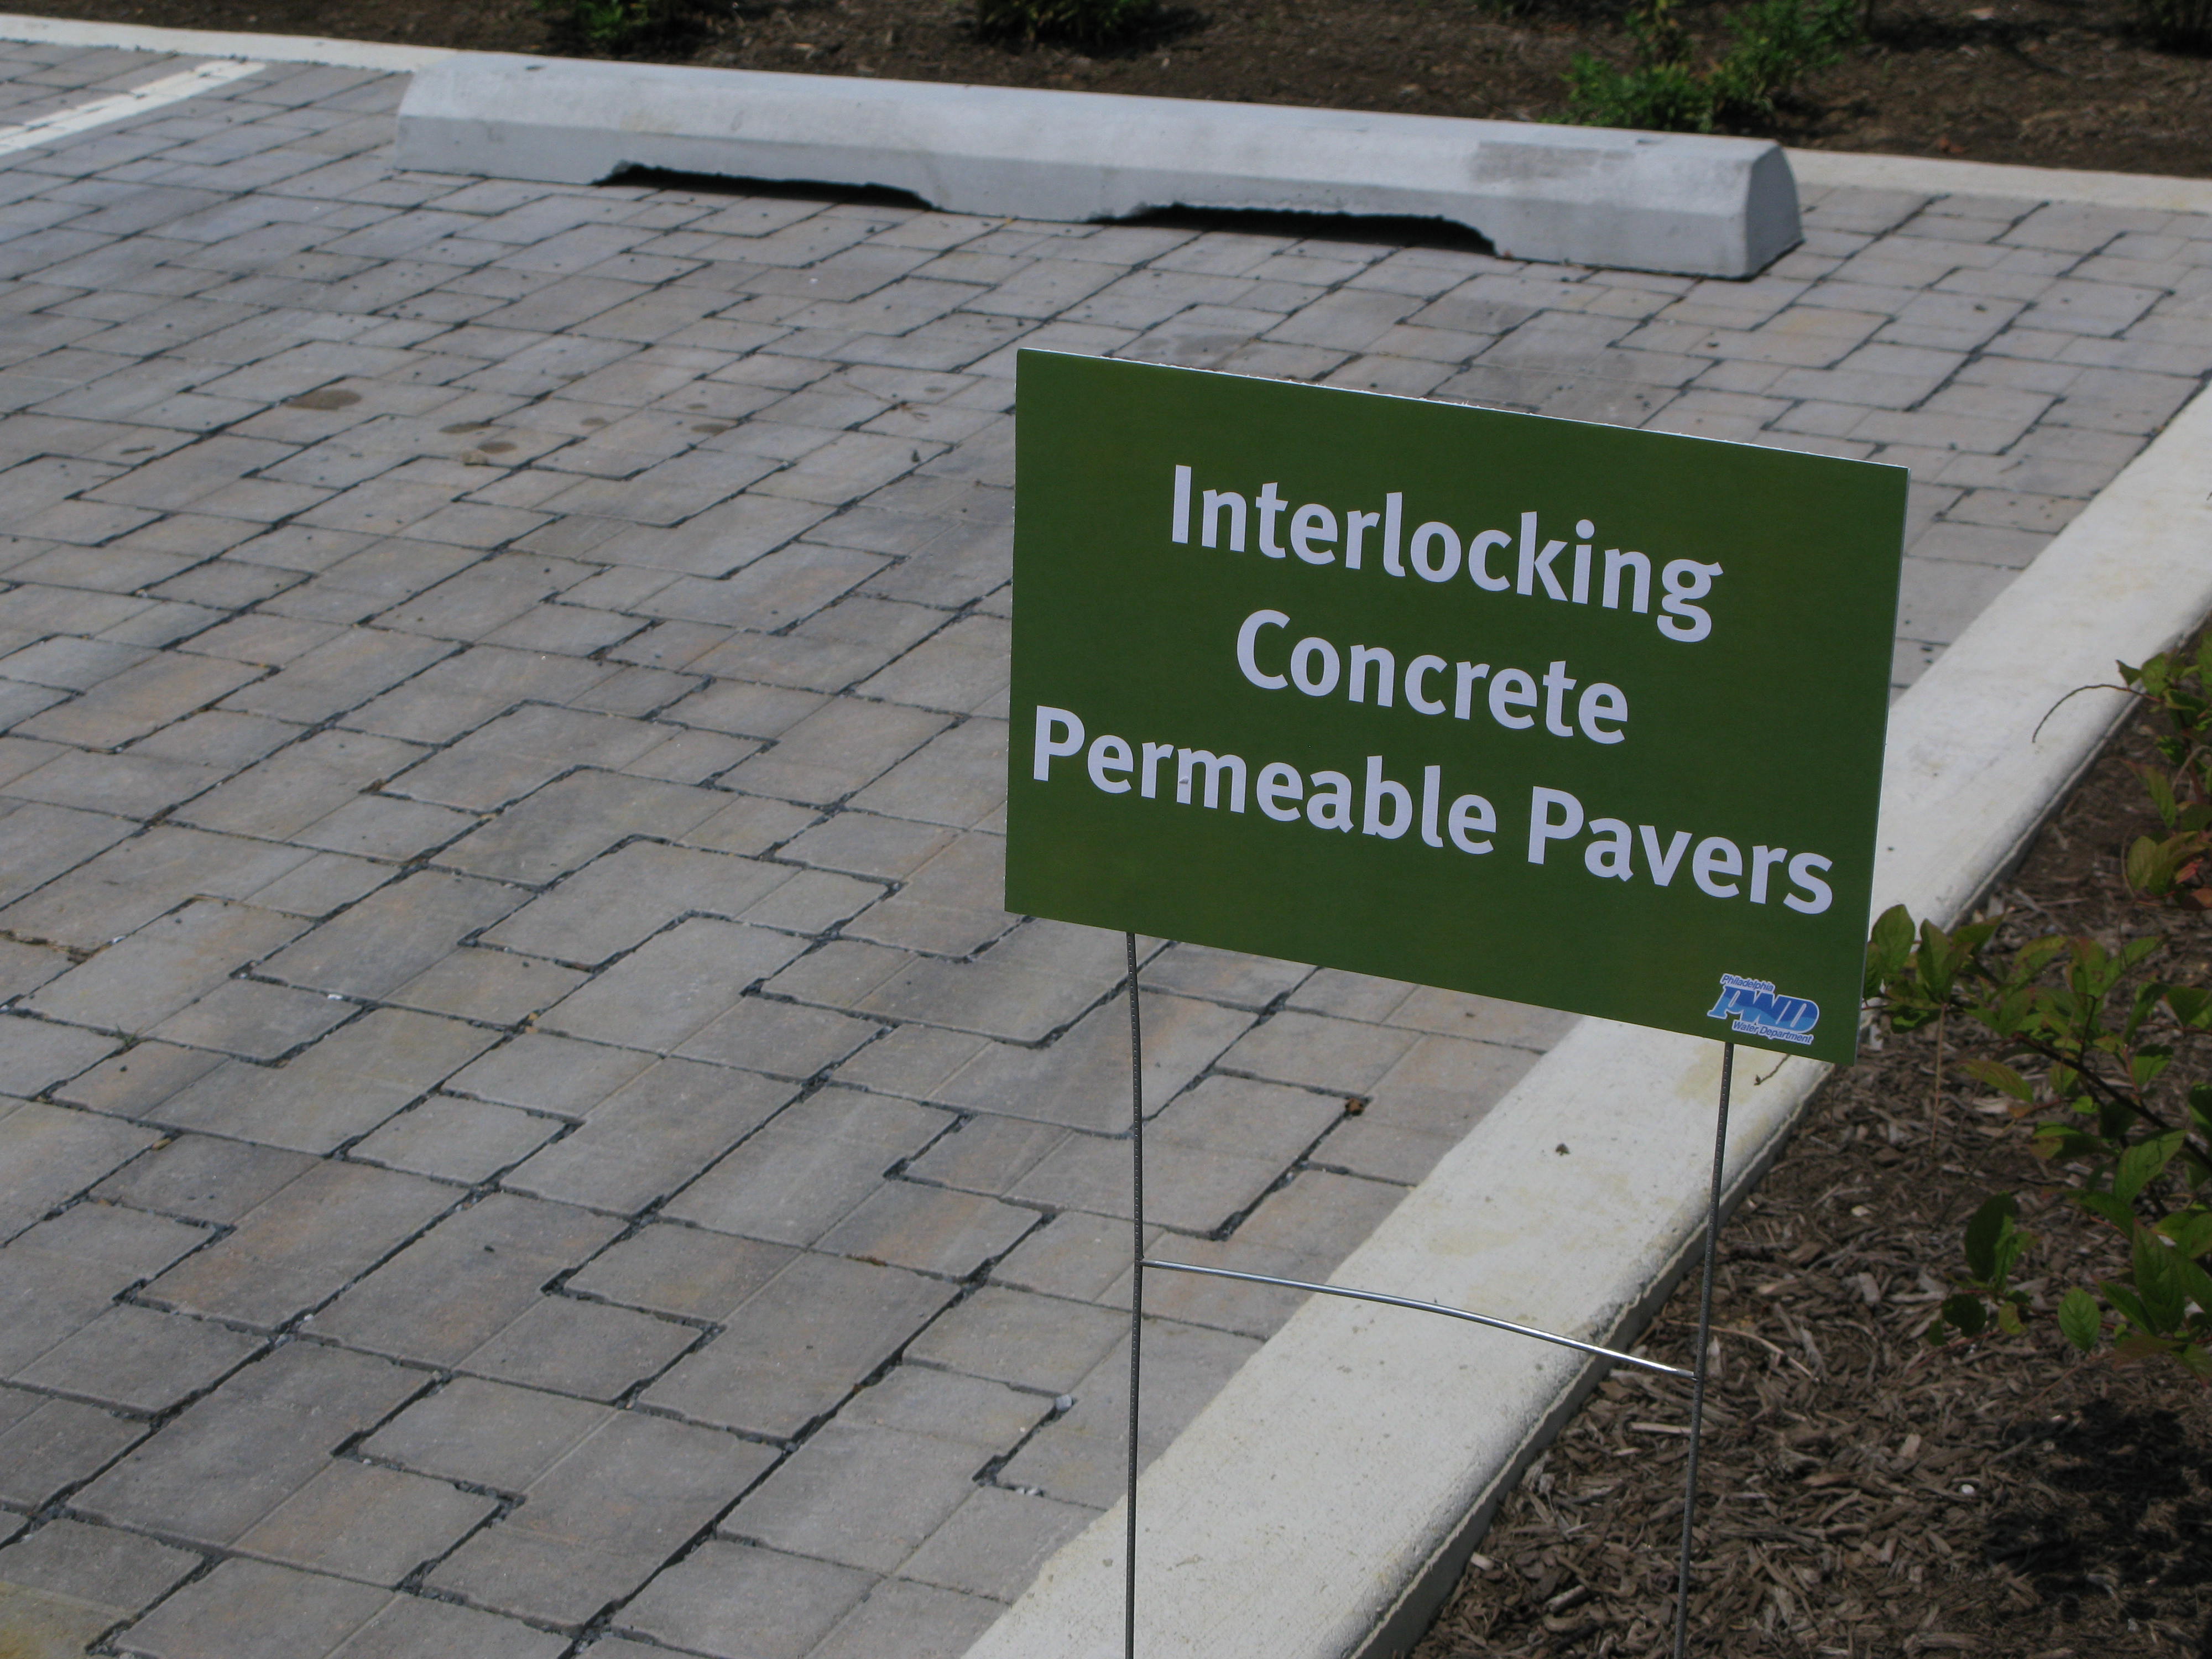 A Philadelphia Water Department parking lot includes interlocking concrete permeable pavers and other types of permeable pavements